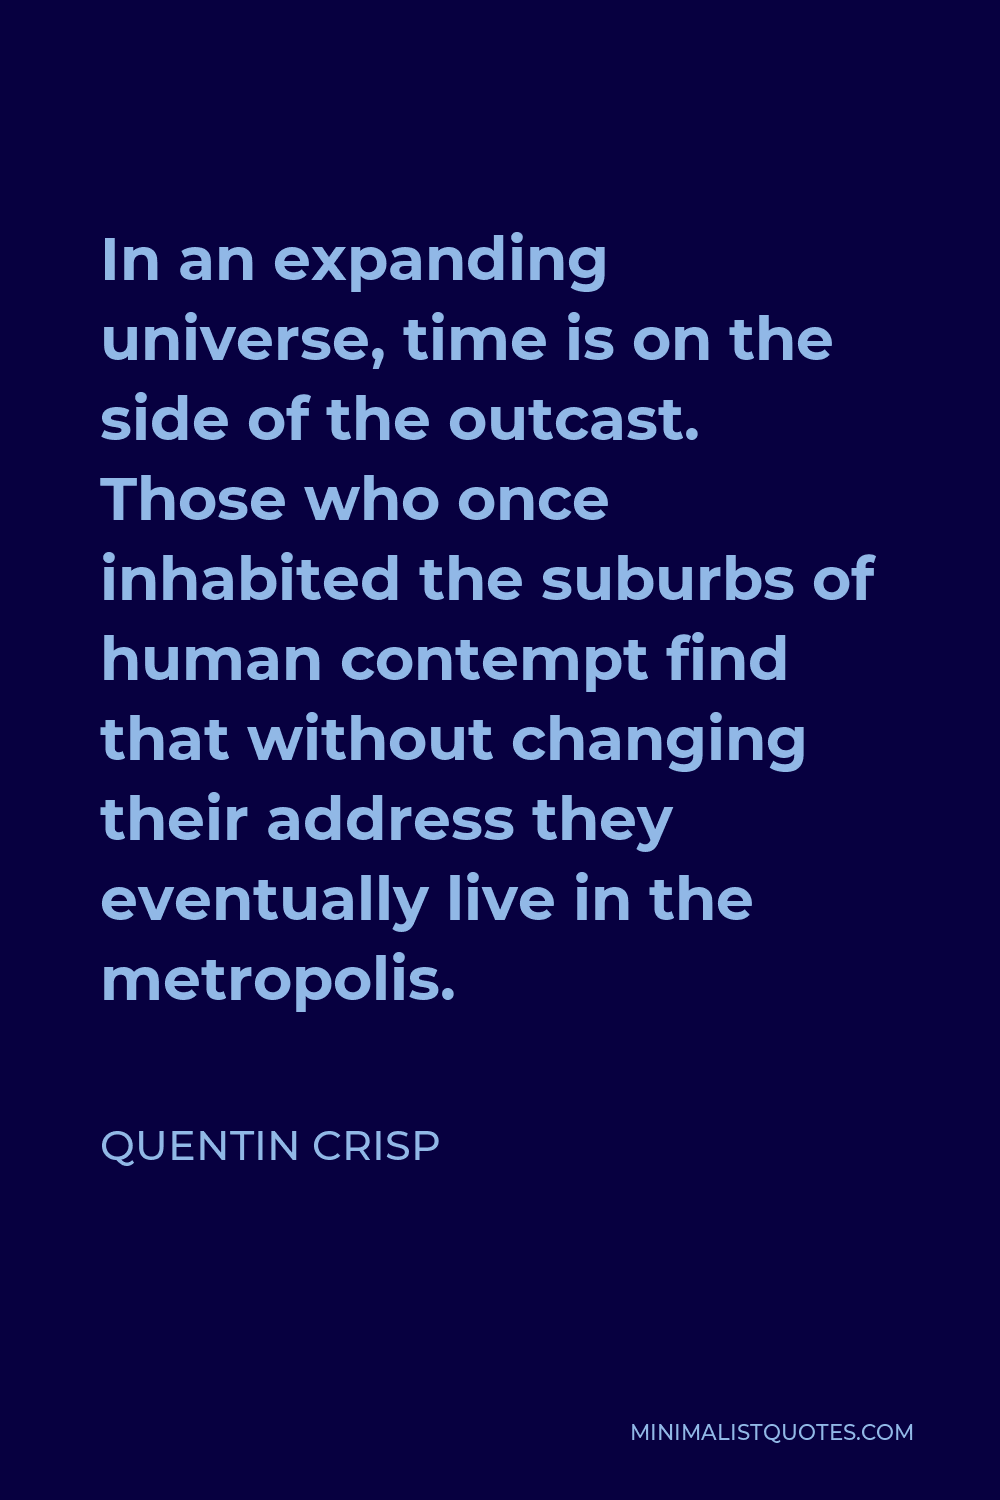 Quentin Crisp Quote - In an expanding universe, time is on the side of the outcast. Those who once inhabited the suburbs of human contempt find that without changing their address they eventually live in the metropolis.